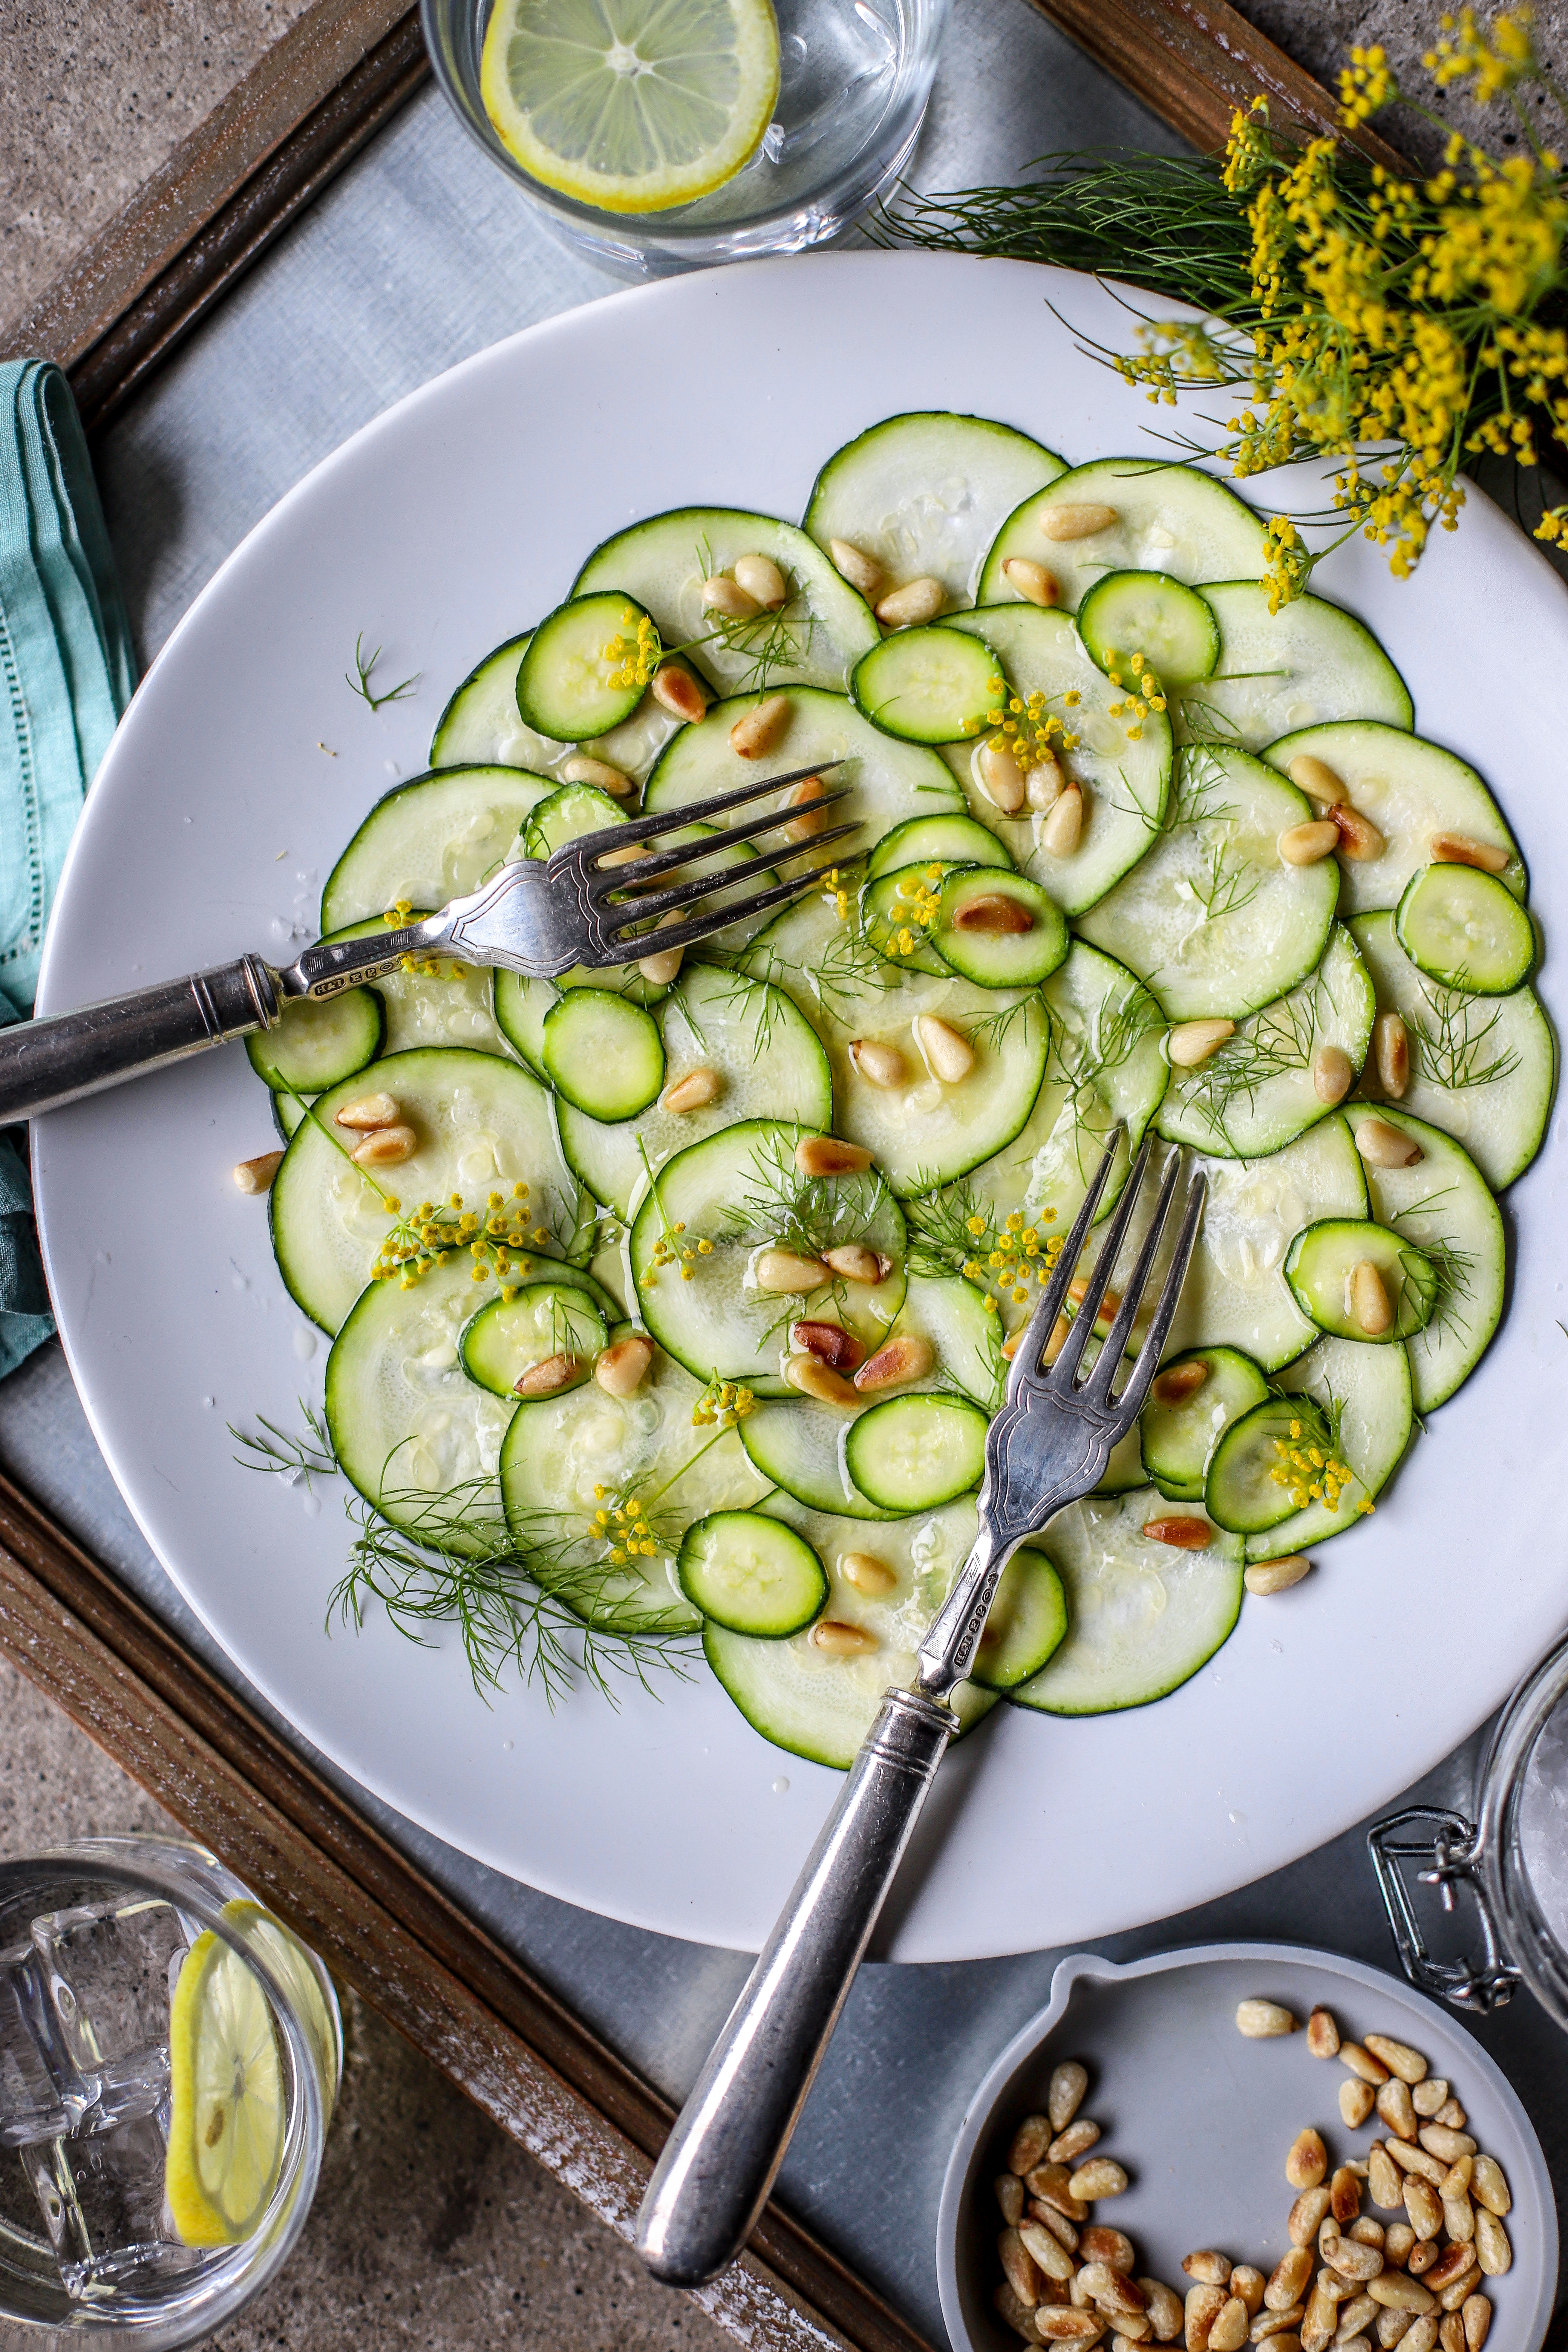 Zucchini Carpaccio with fennel pollen and pine nuts for an easy & sophisticated starter or side dish. #vegan #salad #sidedish #starter #appetizer